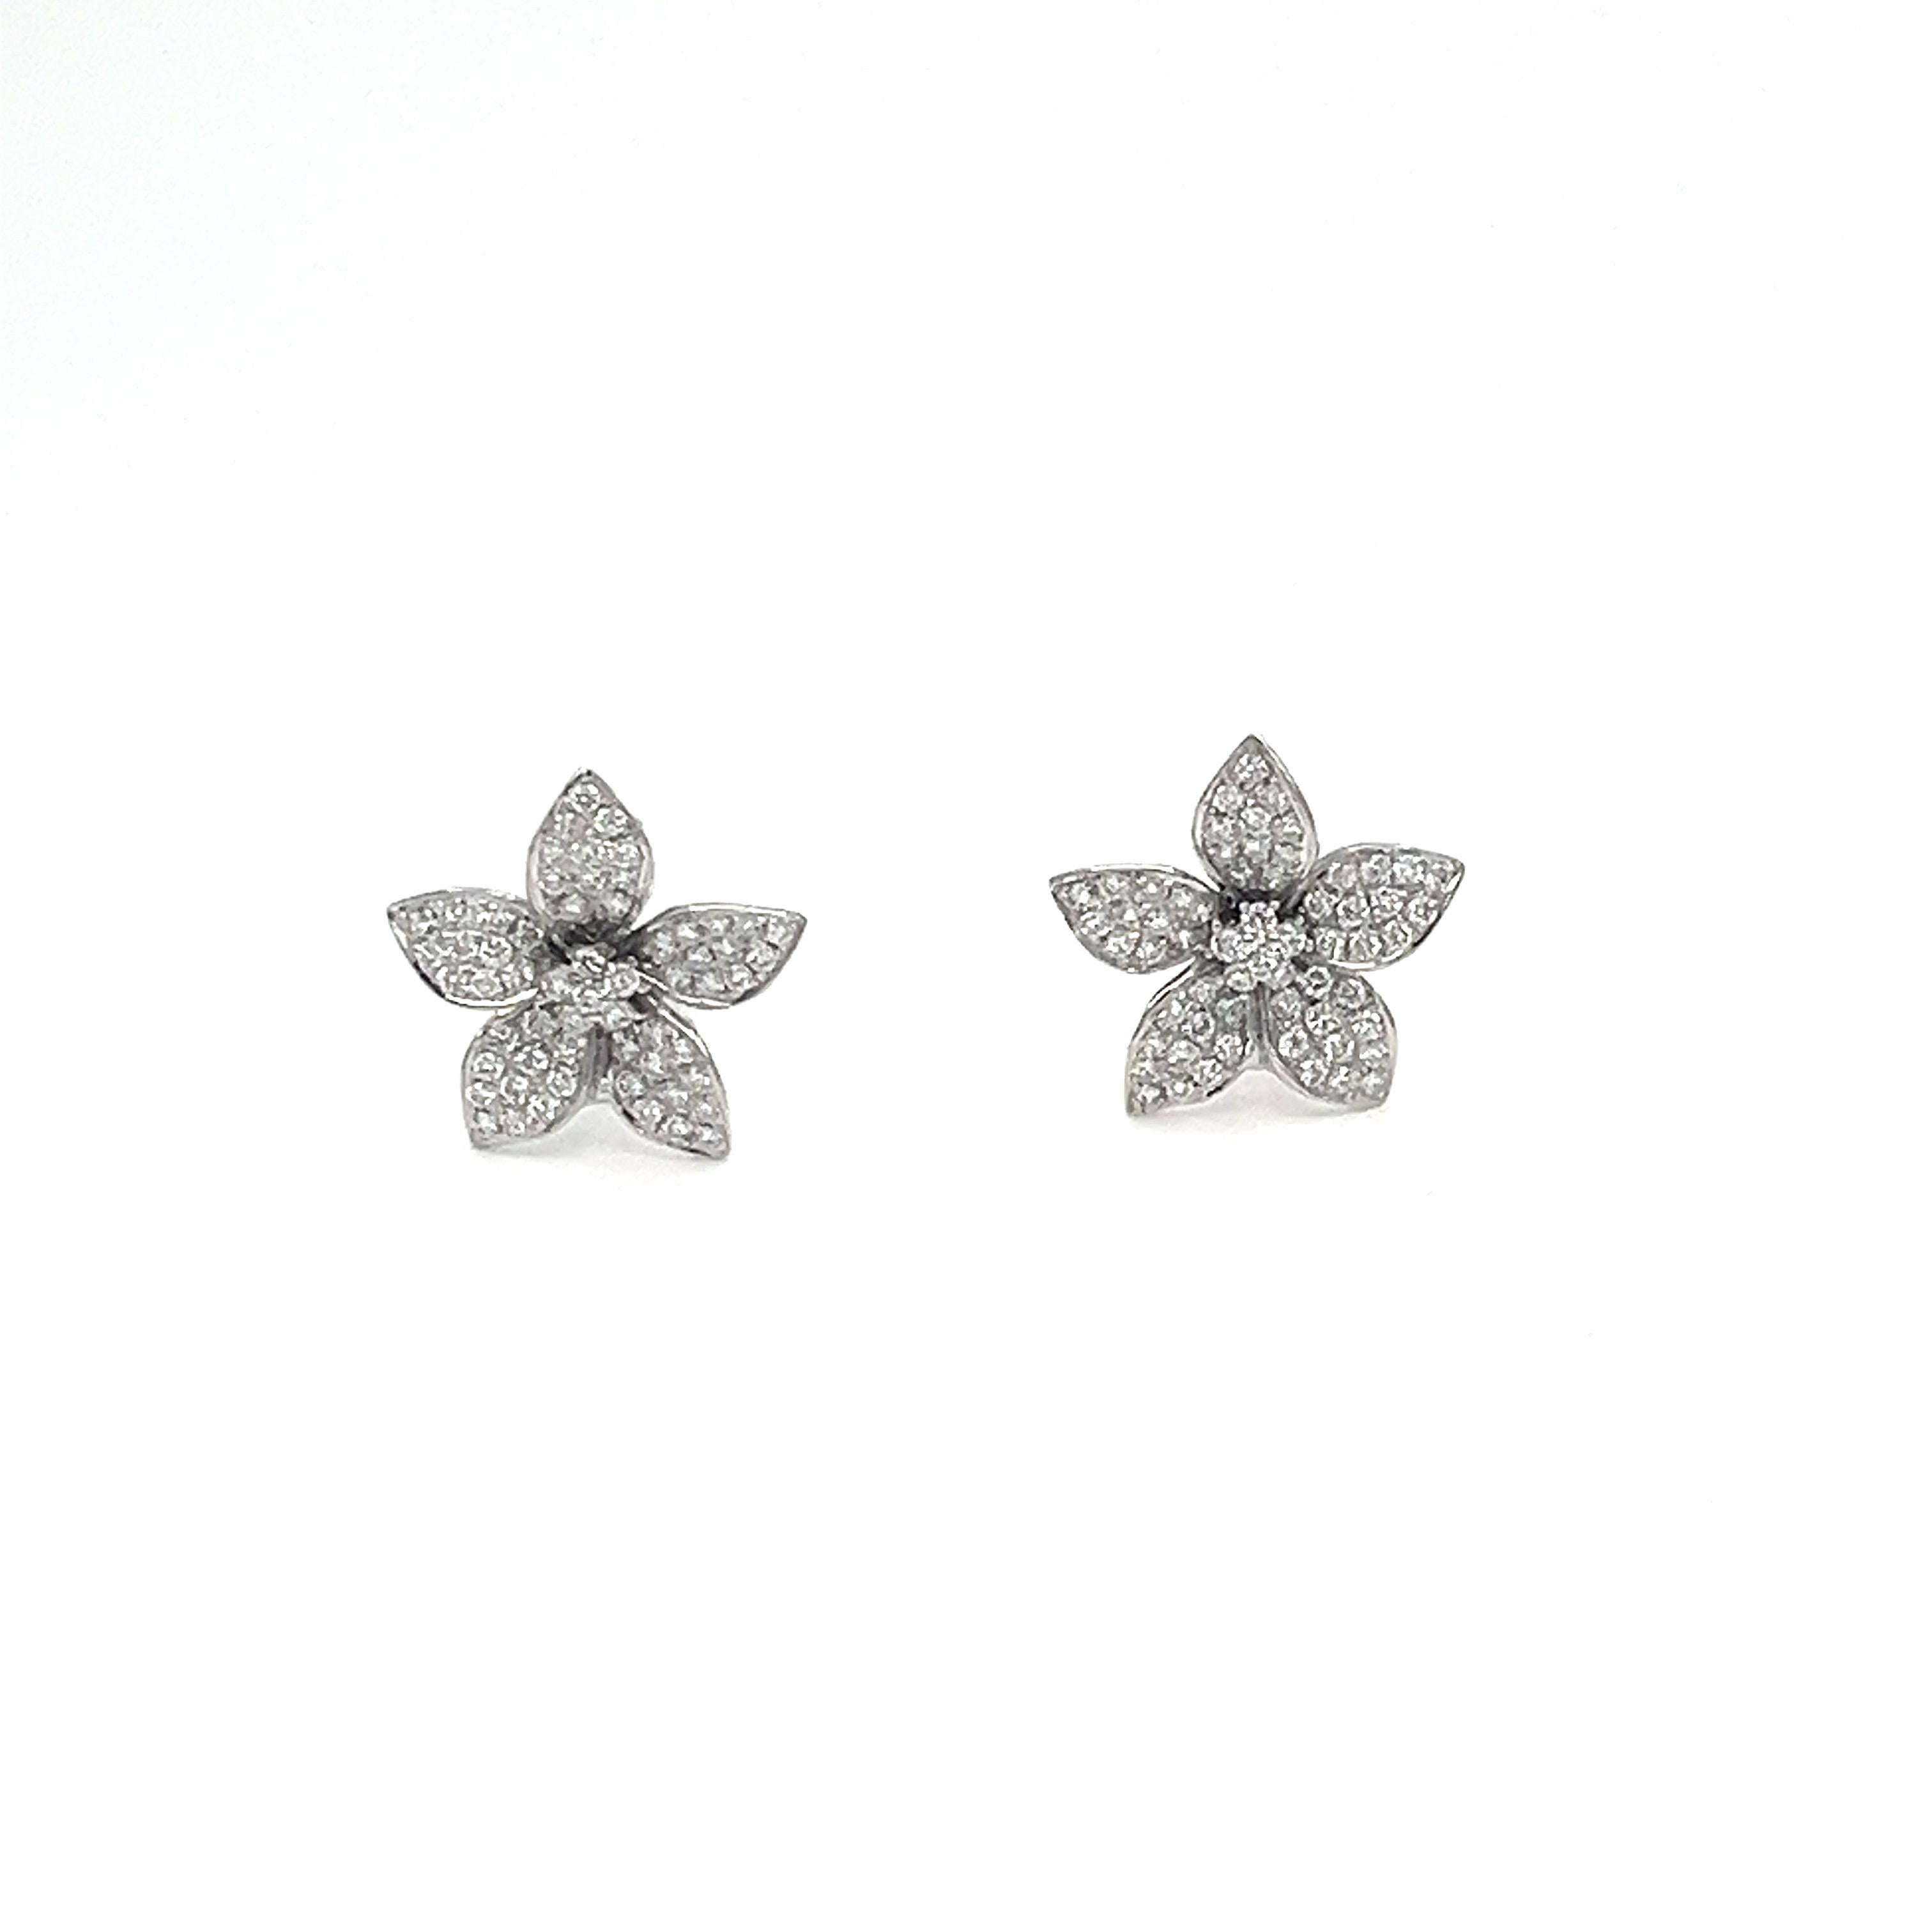 These flowered earrings weighing in at 1.48 ct are set with 142 diamonds with an E/F in color, and a VS1/VS2 in clarity. An excellent addition to any wardrobe. 